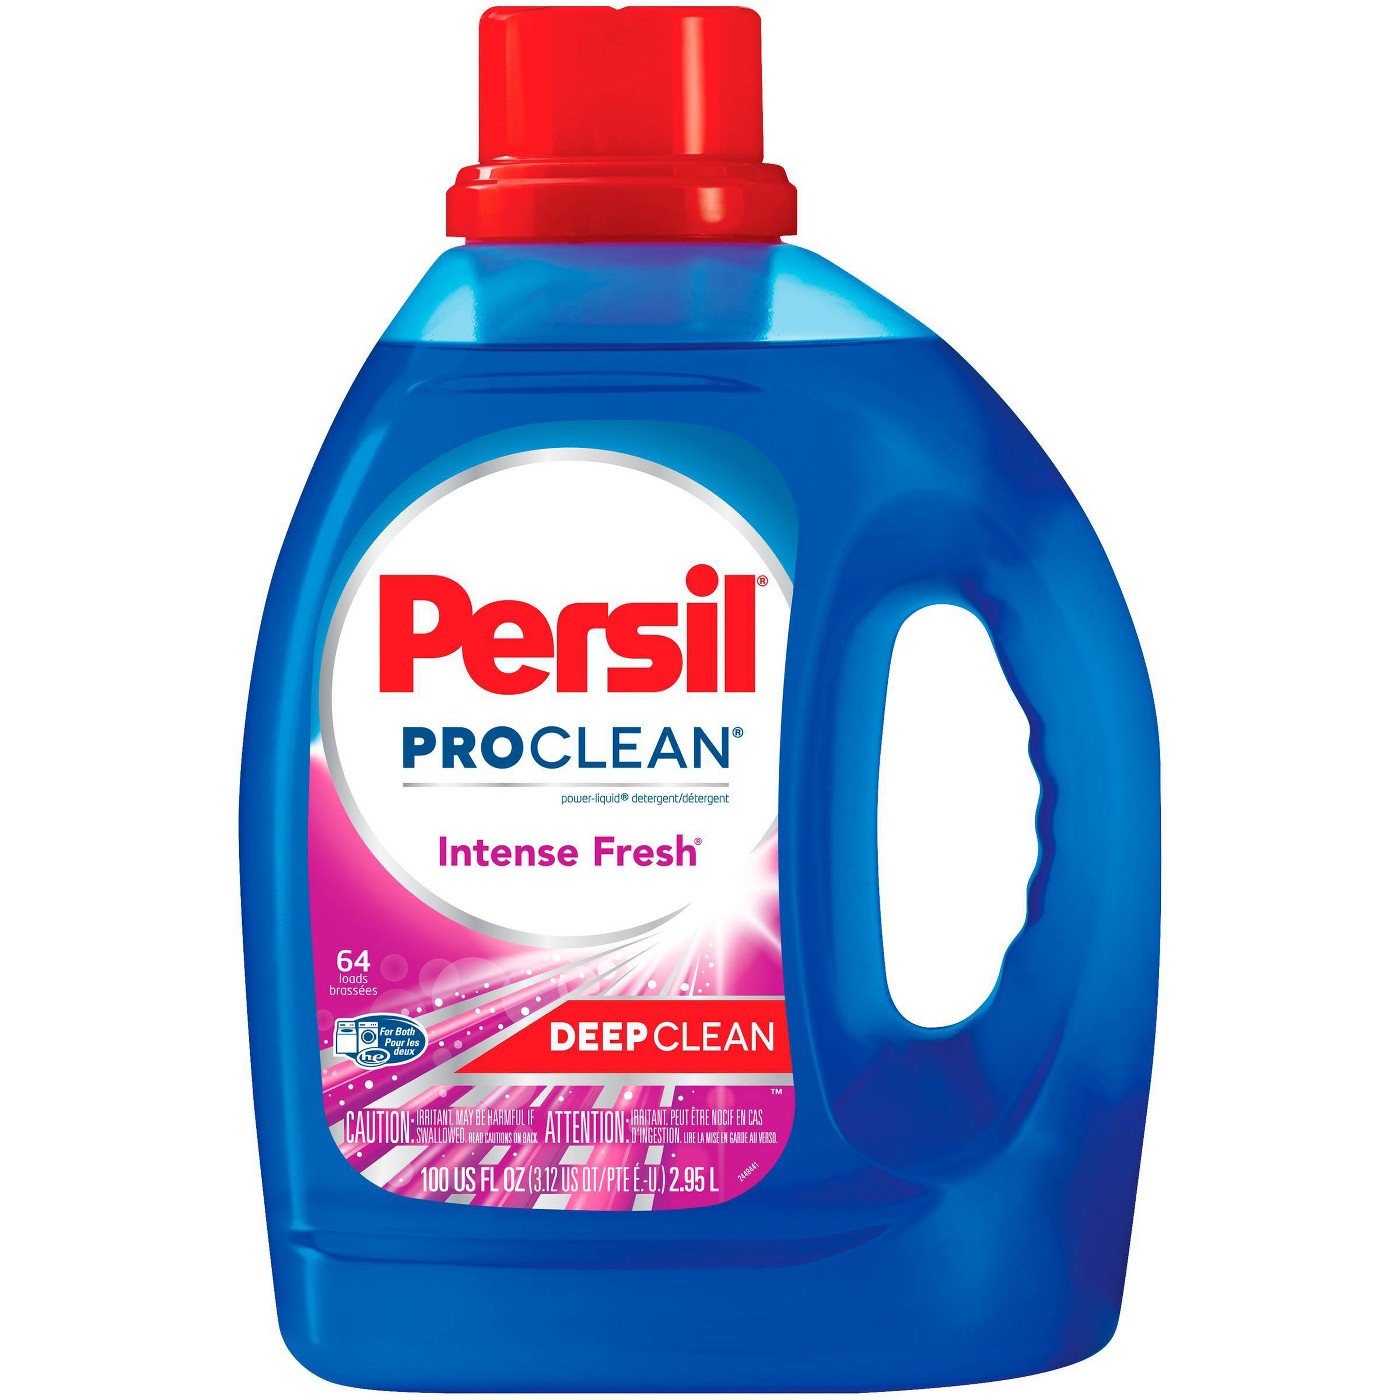 NEW 2 OFF 1 PERSIL COUPON AND I AM PRINTING MINE NOW